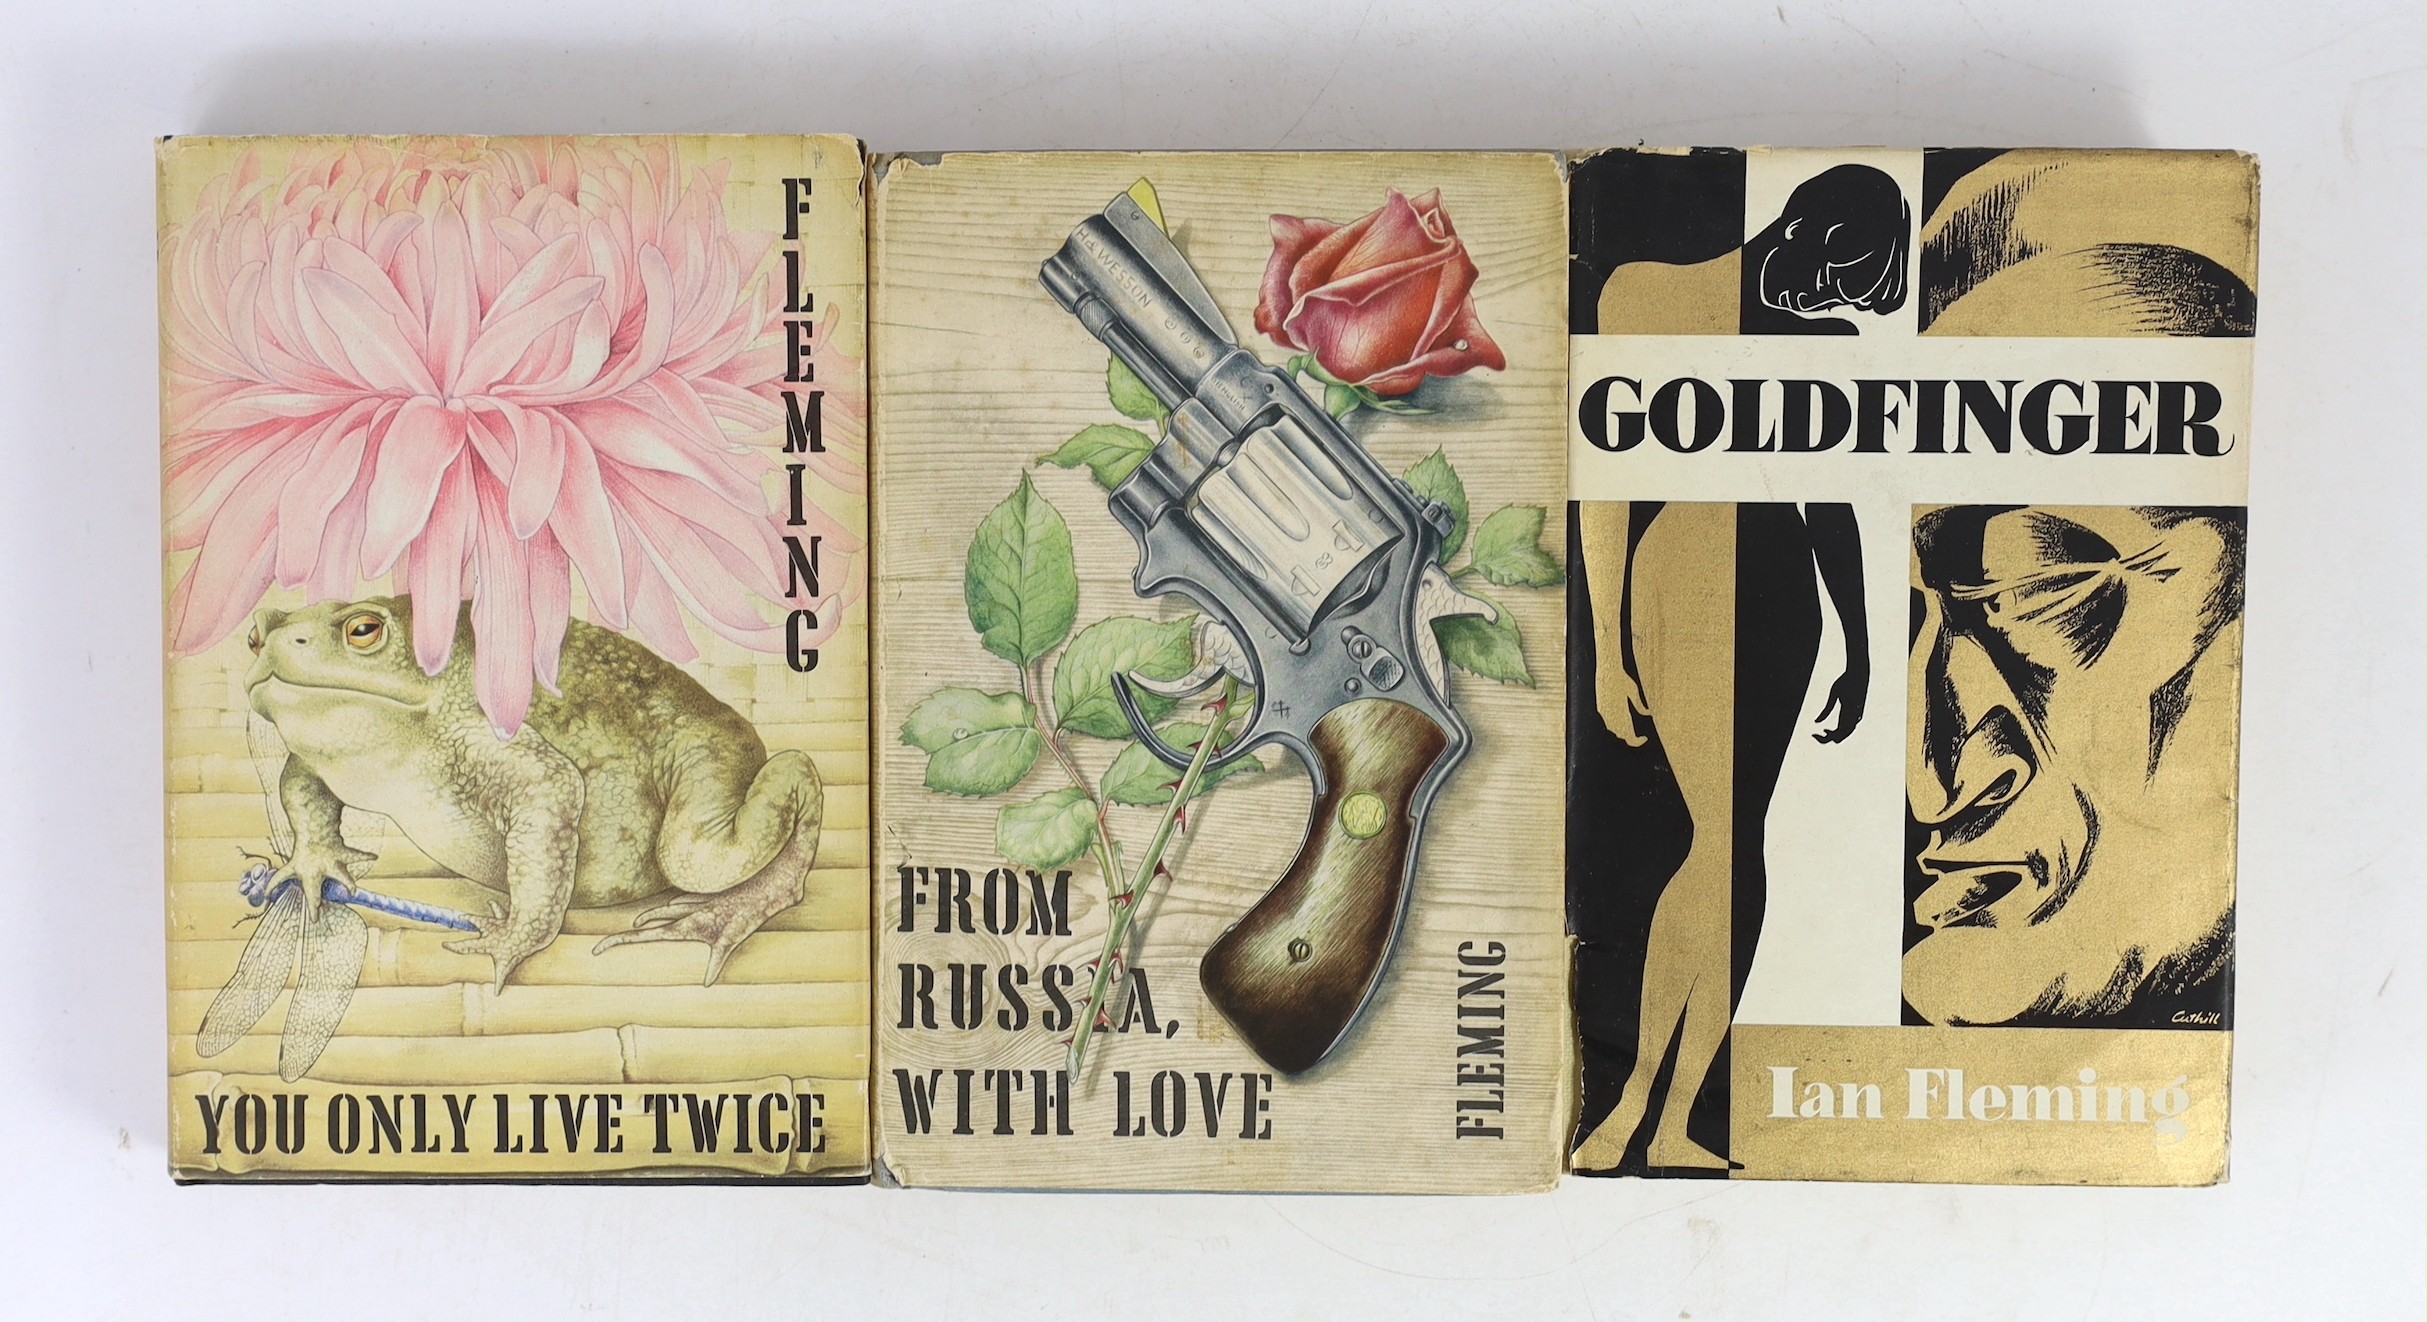 Fleming, Ian - You Only Live Twice, 1st edition, 8vo, original cloth, in unclipped d/j, ownership inscription to front fly leaf, Jonathan Cape, London, 1964; Goldfinger, Book Club Edition, in d/j, London, 1959 and From R